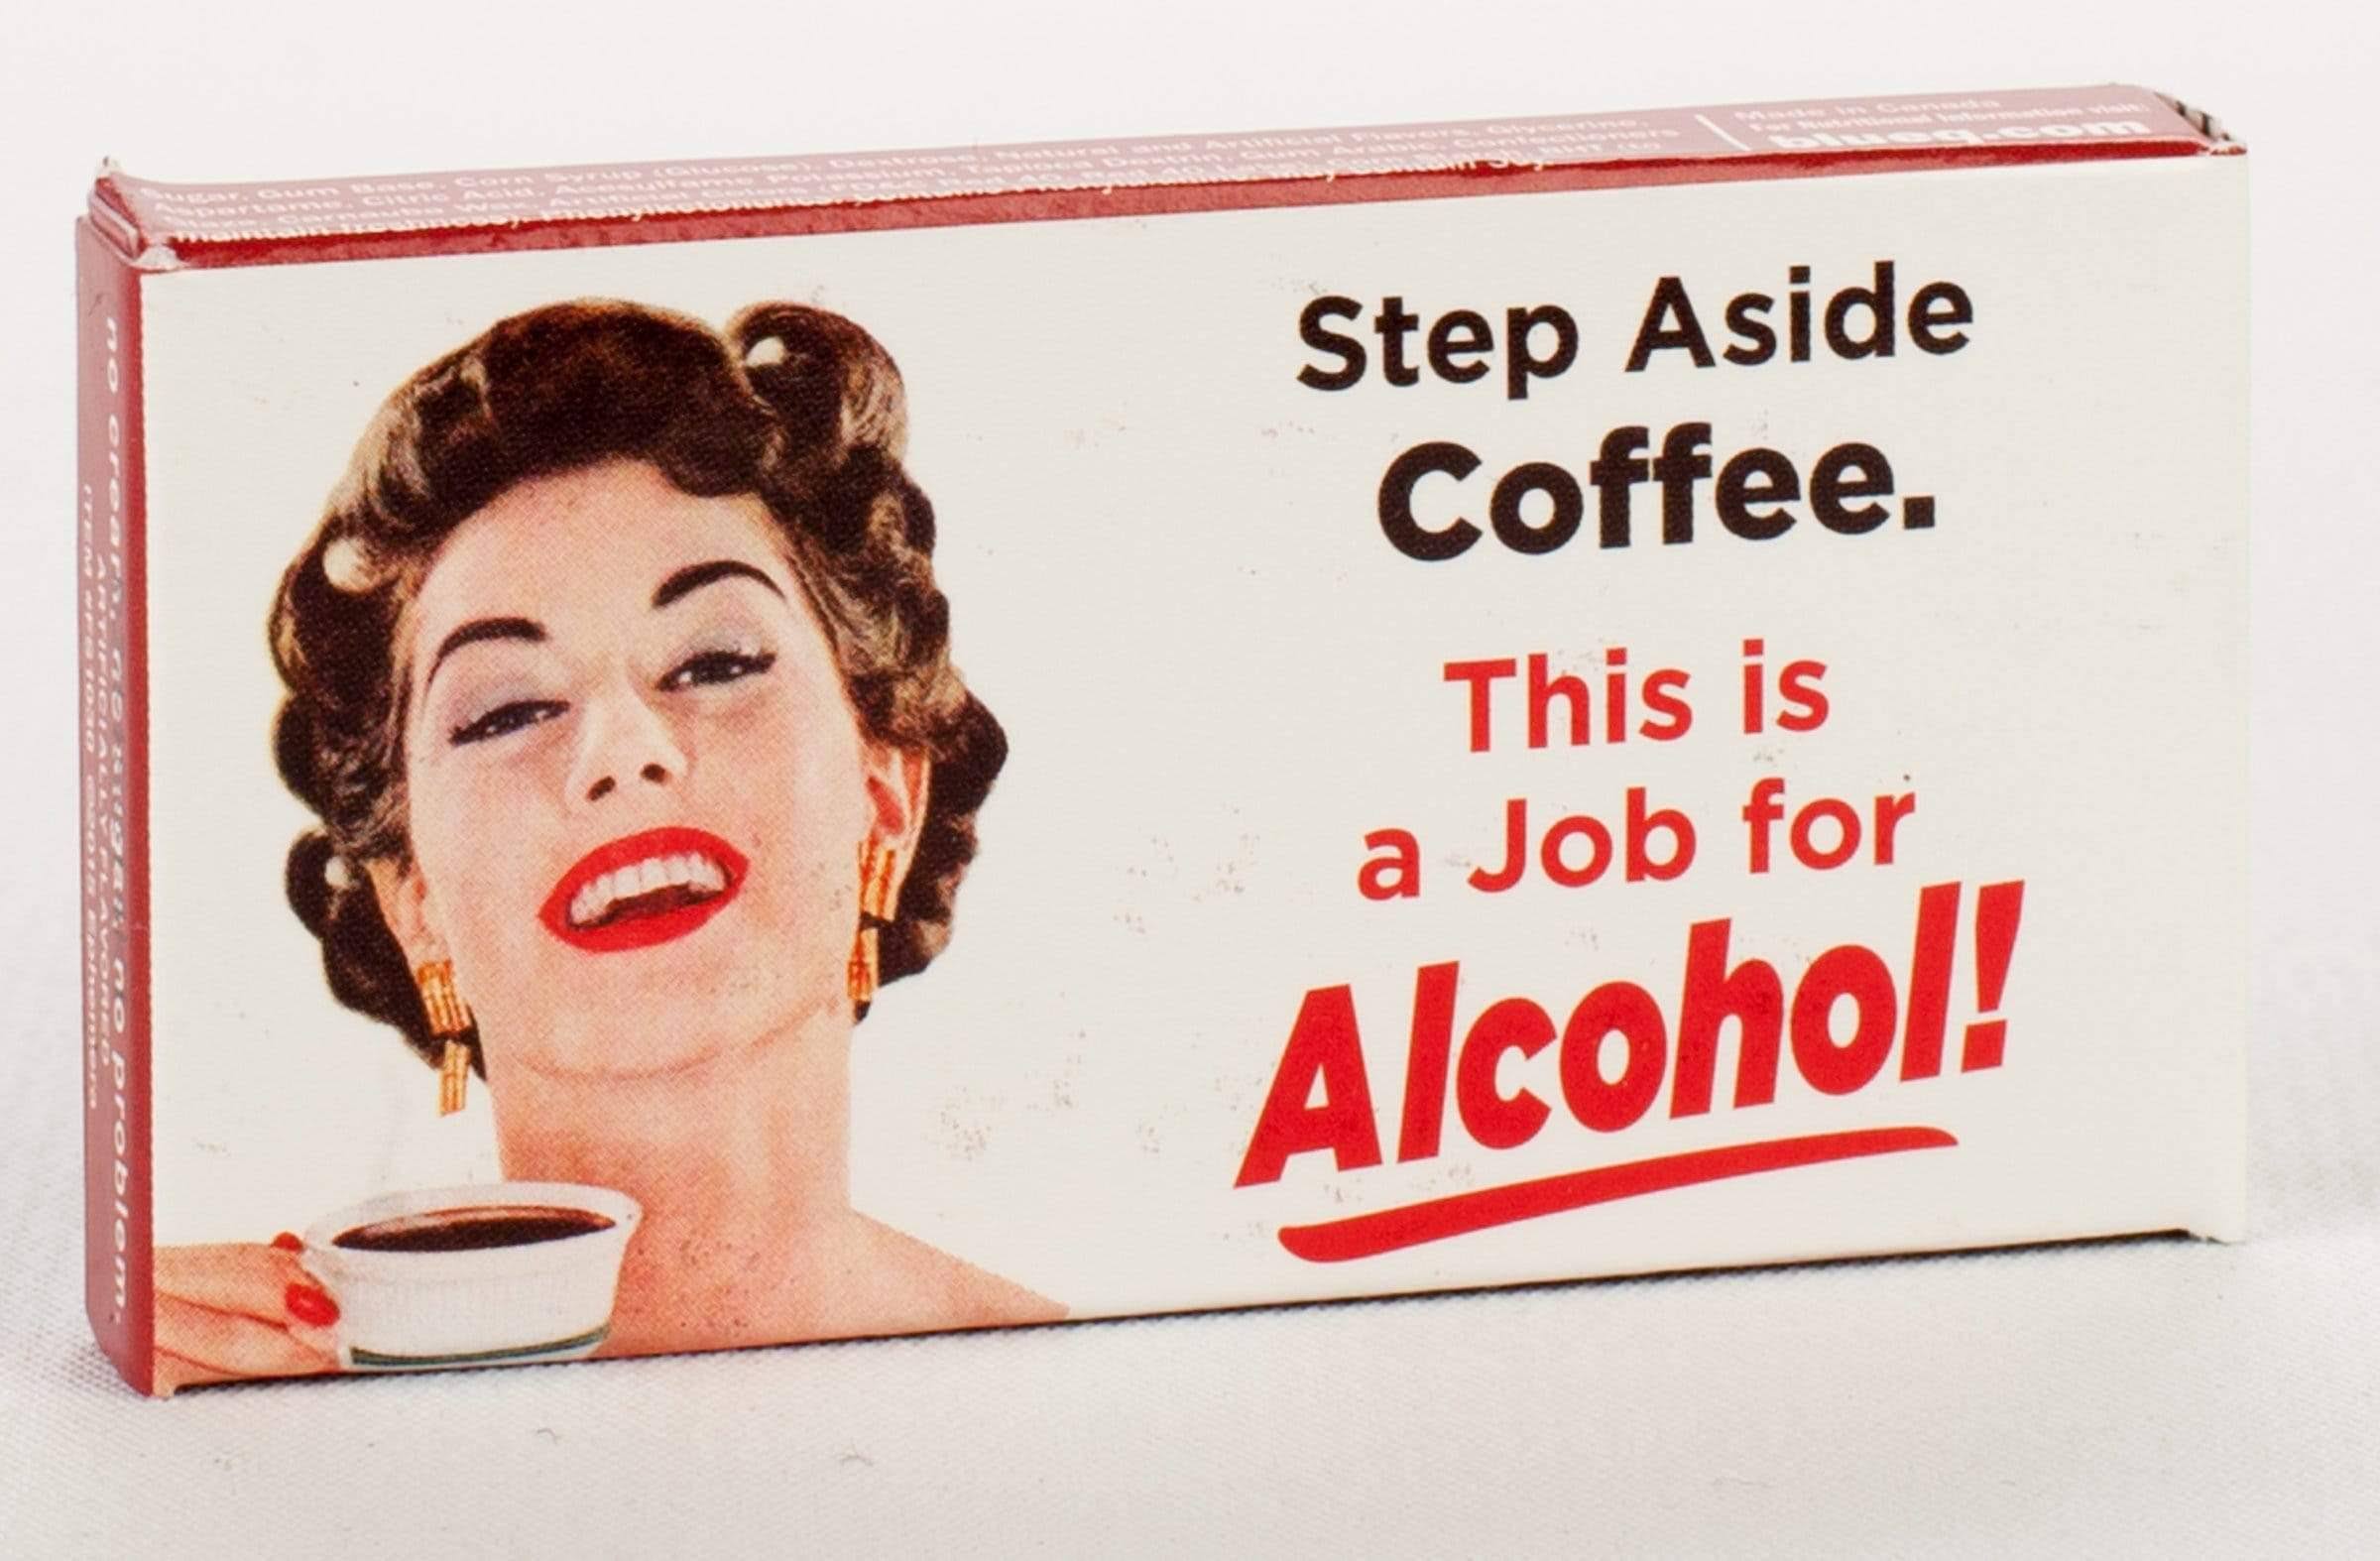 Step Aside Coffee This Job Is for Alcohol Cinnamon Gum - 4 Pack